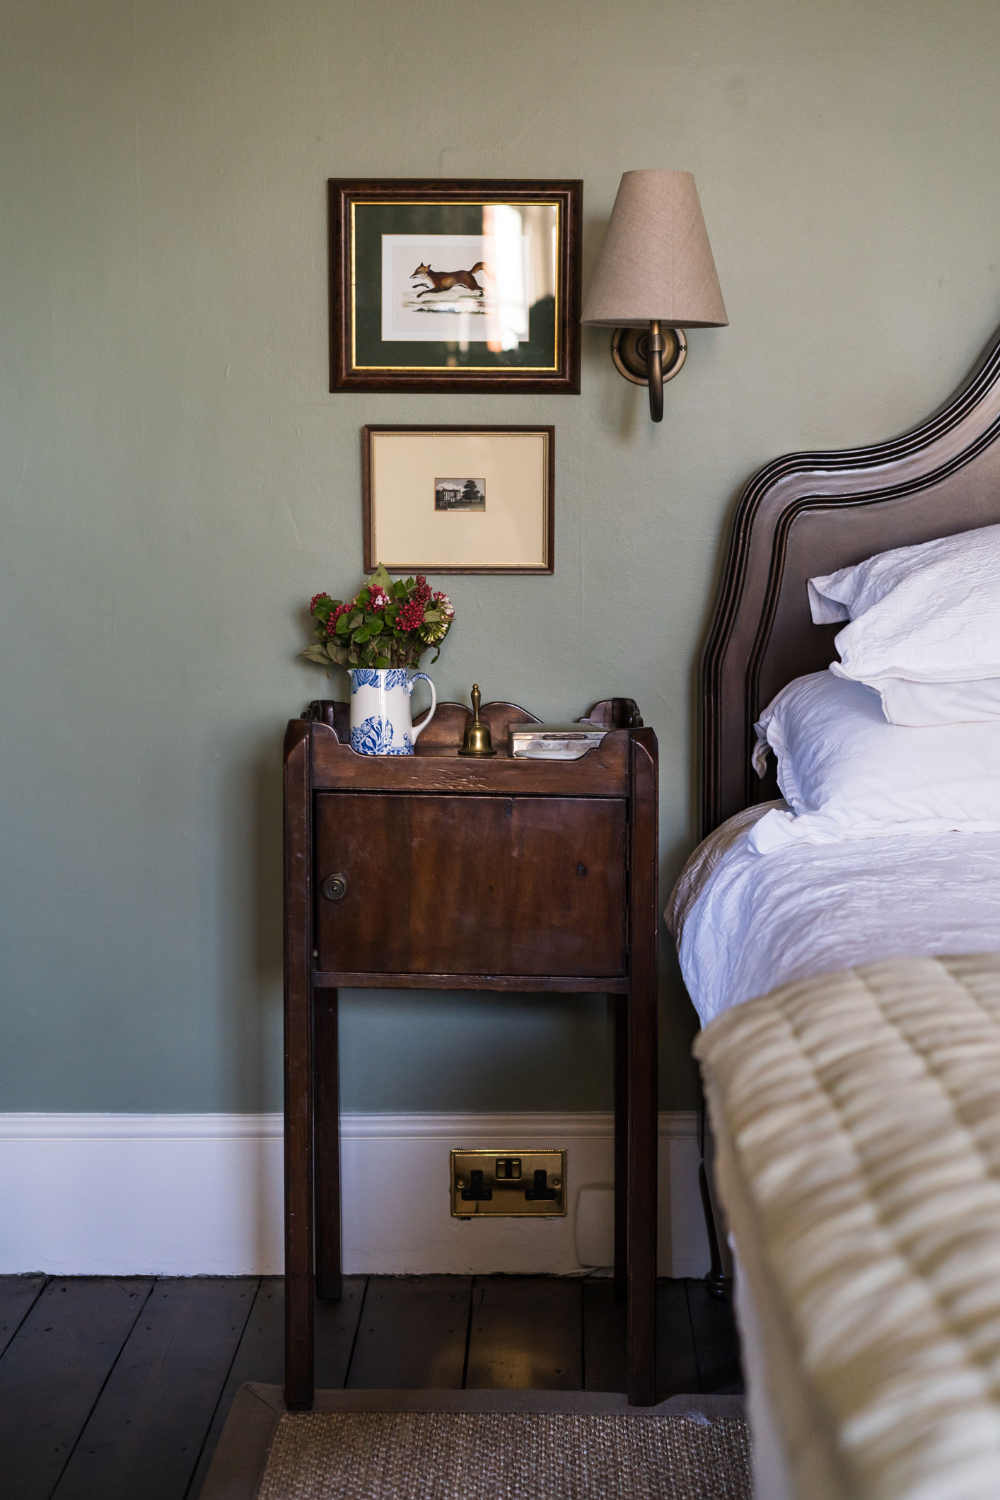 Factors To Consider While Buying A Bedside Table